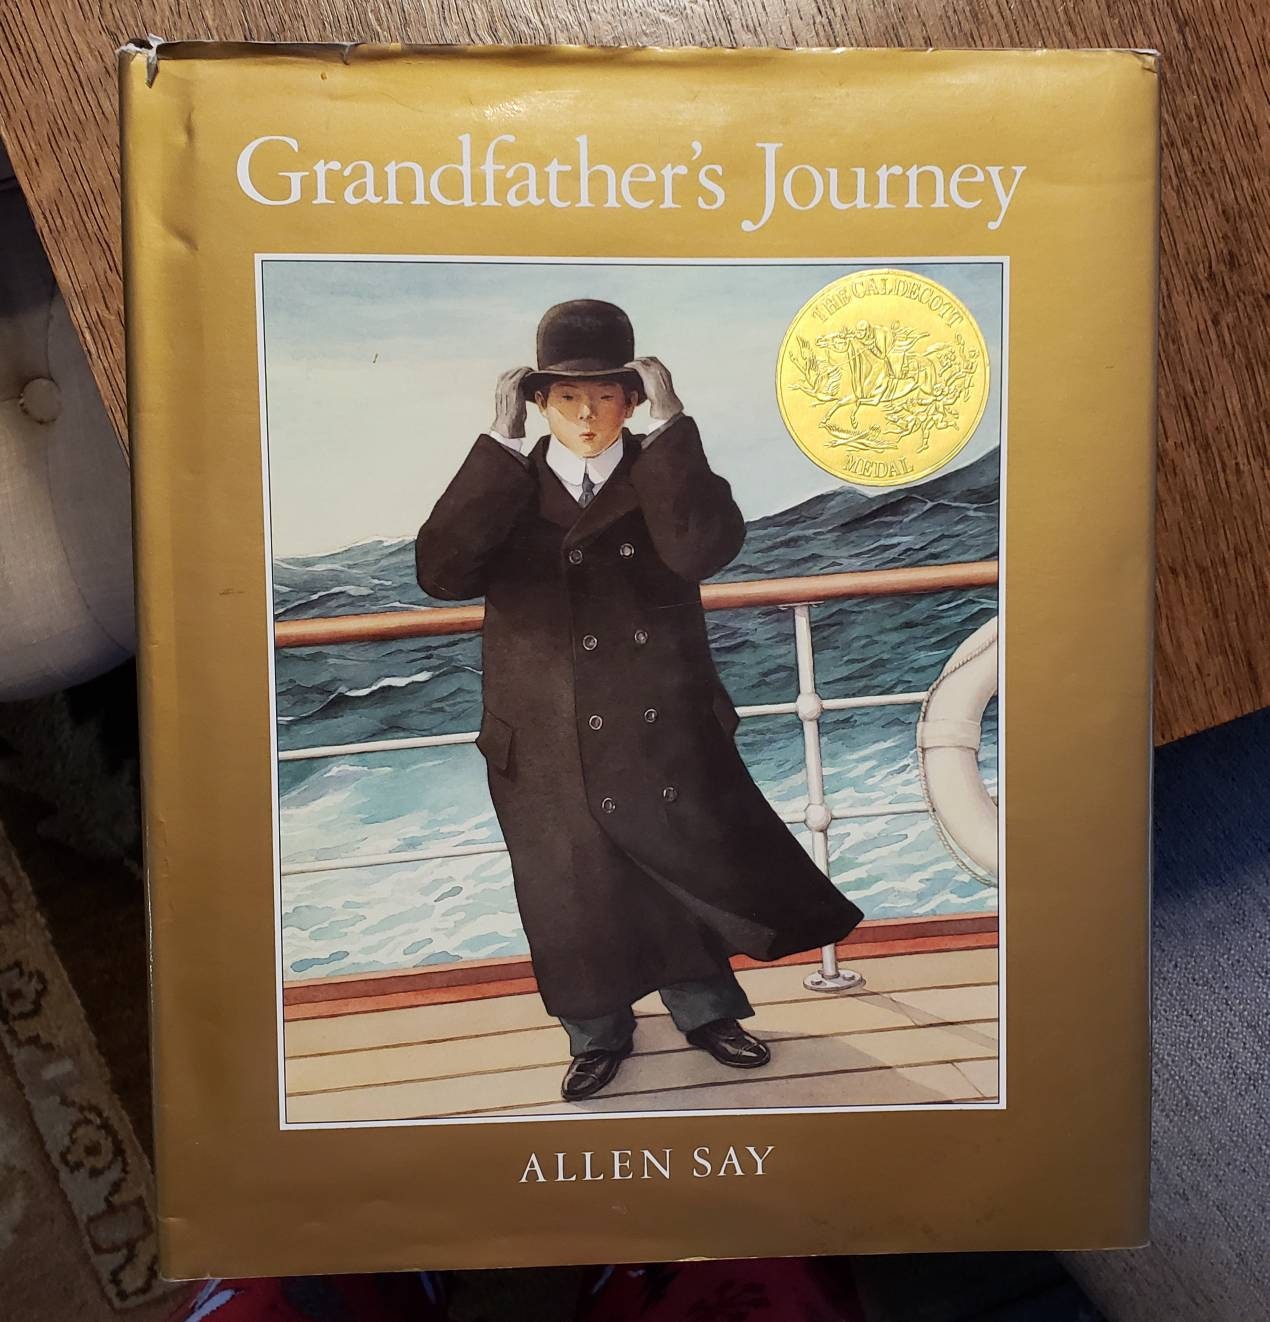 is grandfather's journey a true story